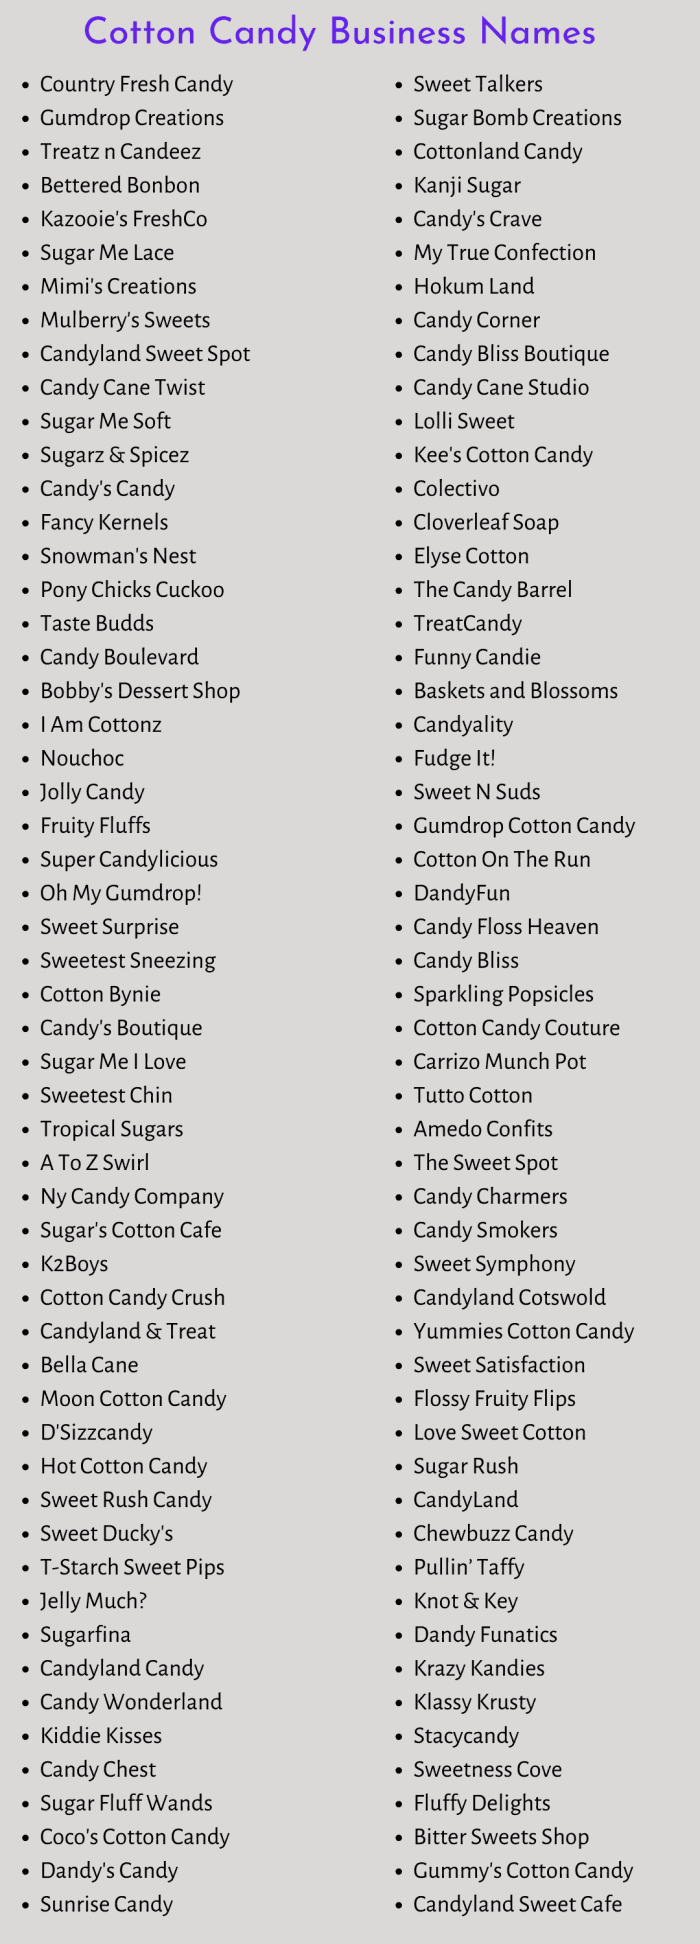 Cotton Candy Business Names